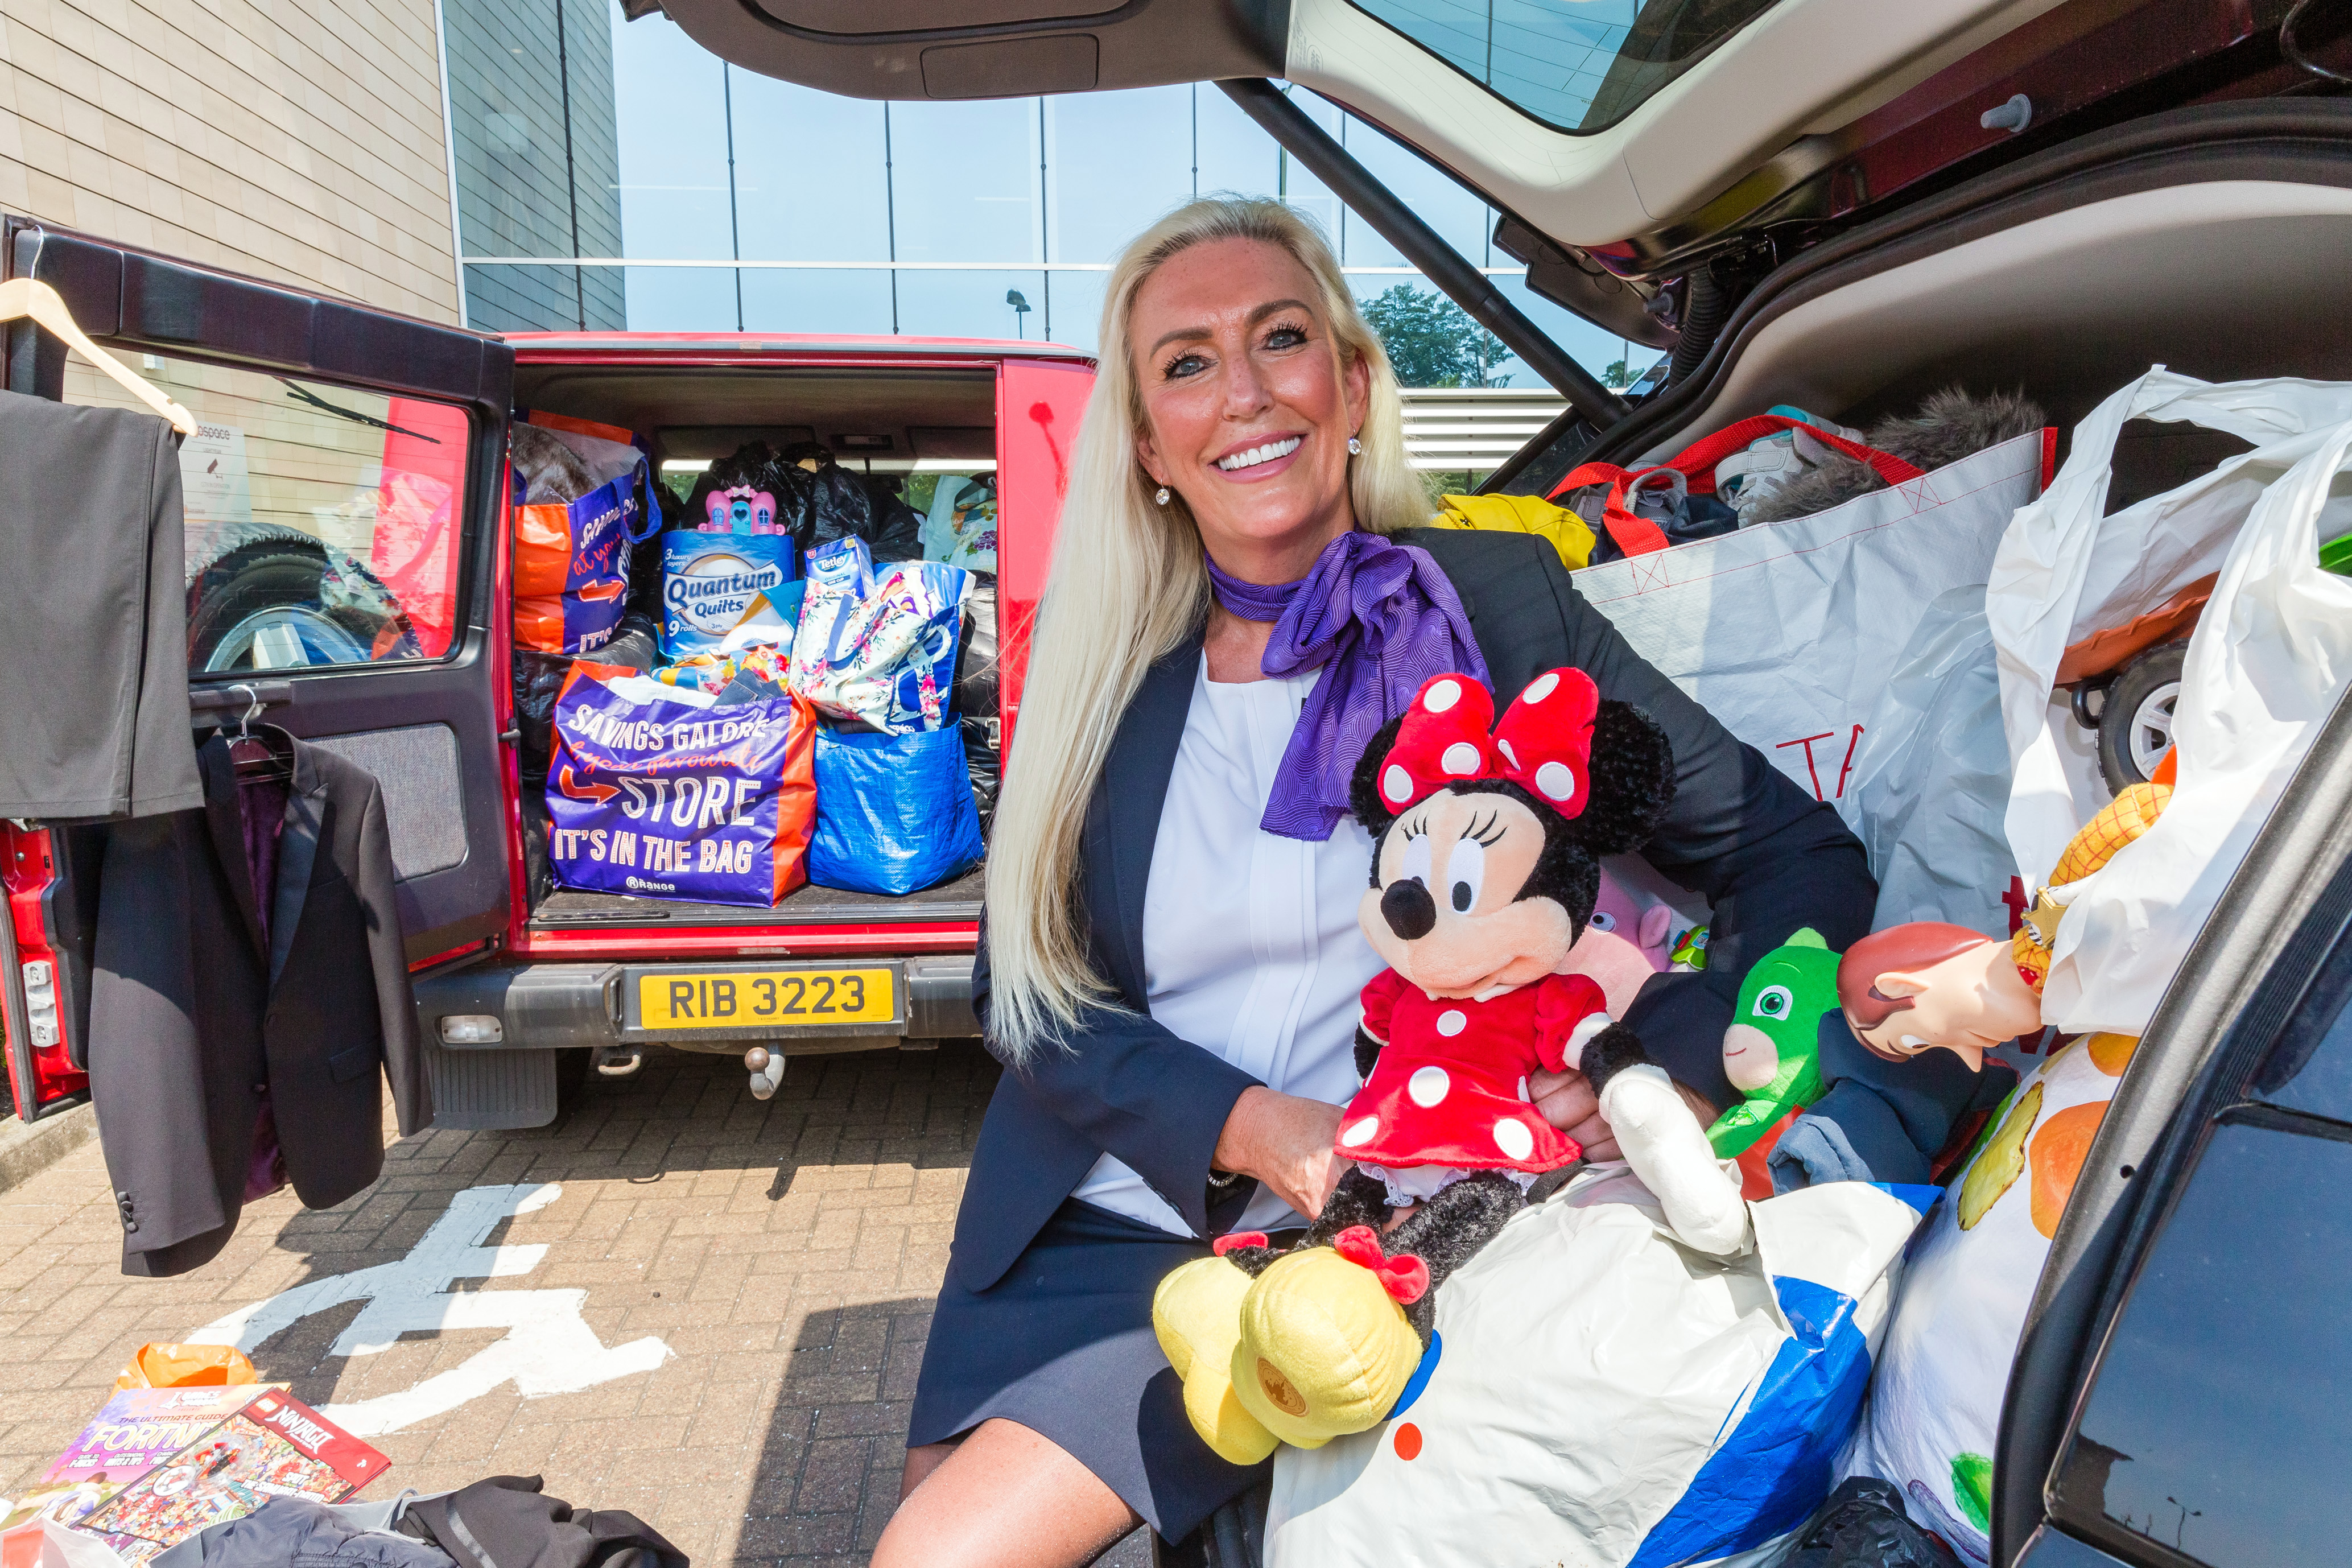 Taylor Wimpey donates to Glasgow homeless charity